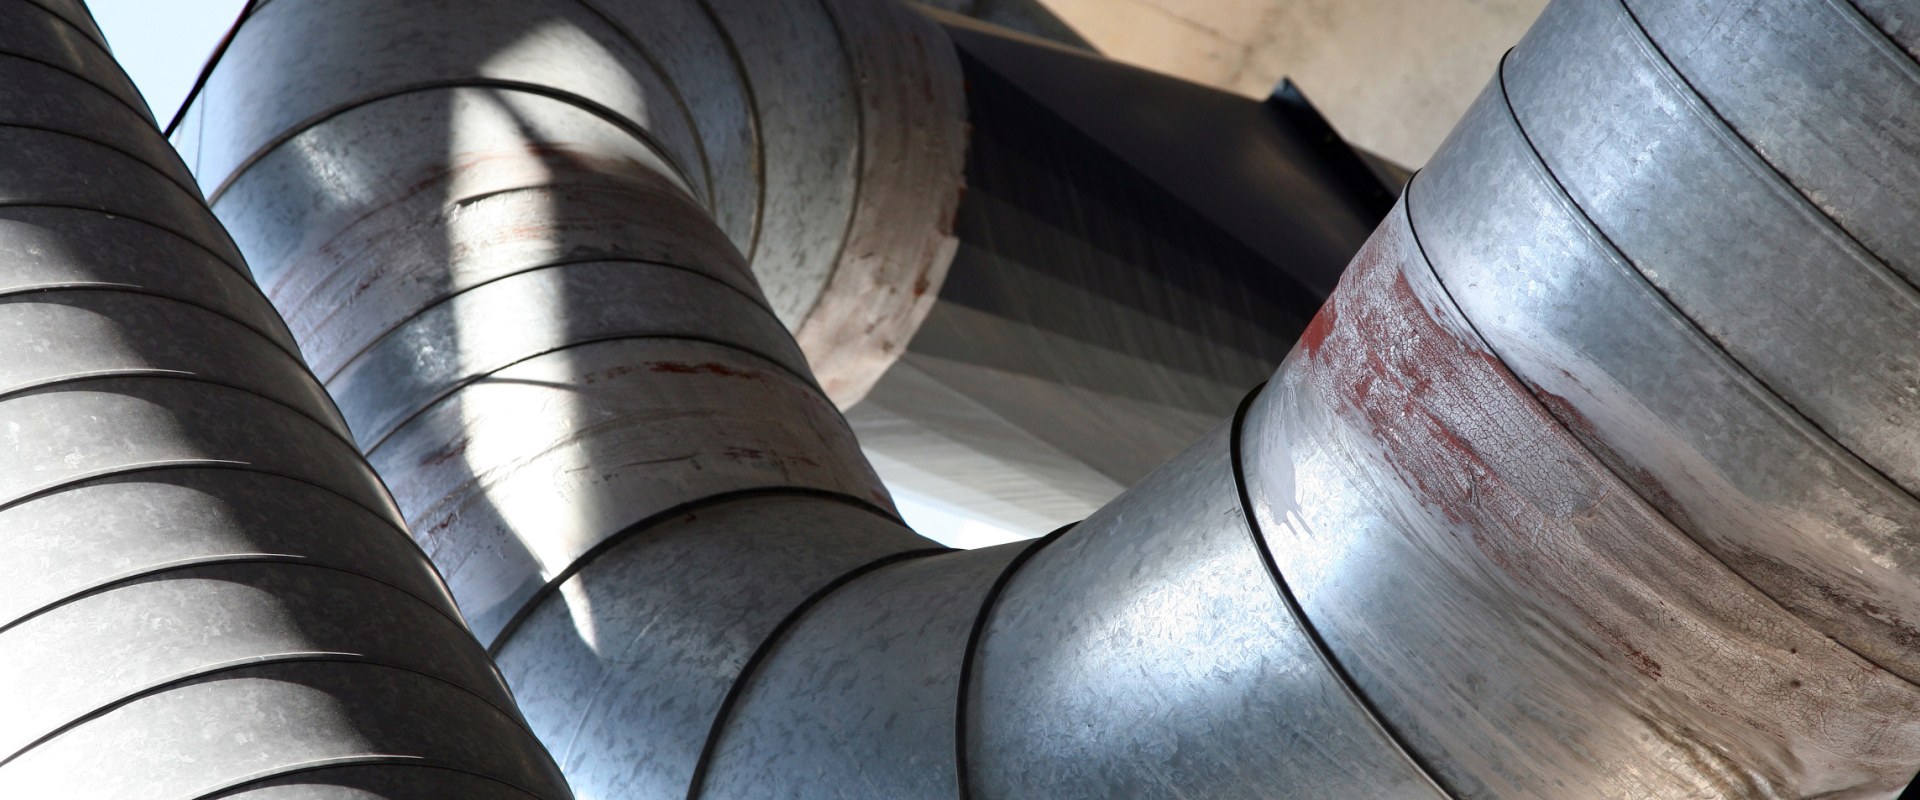 Understanding Pressure Classifications for Ductwork Systems